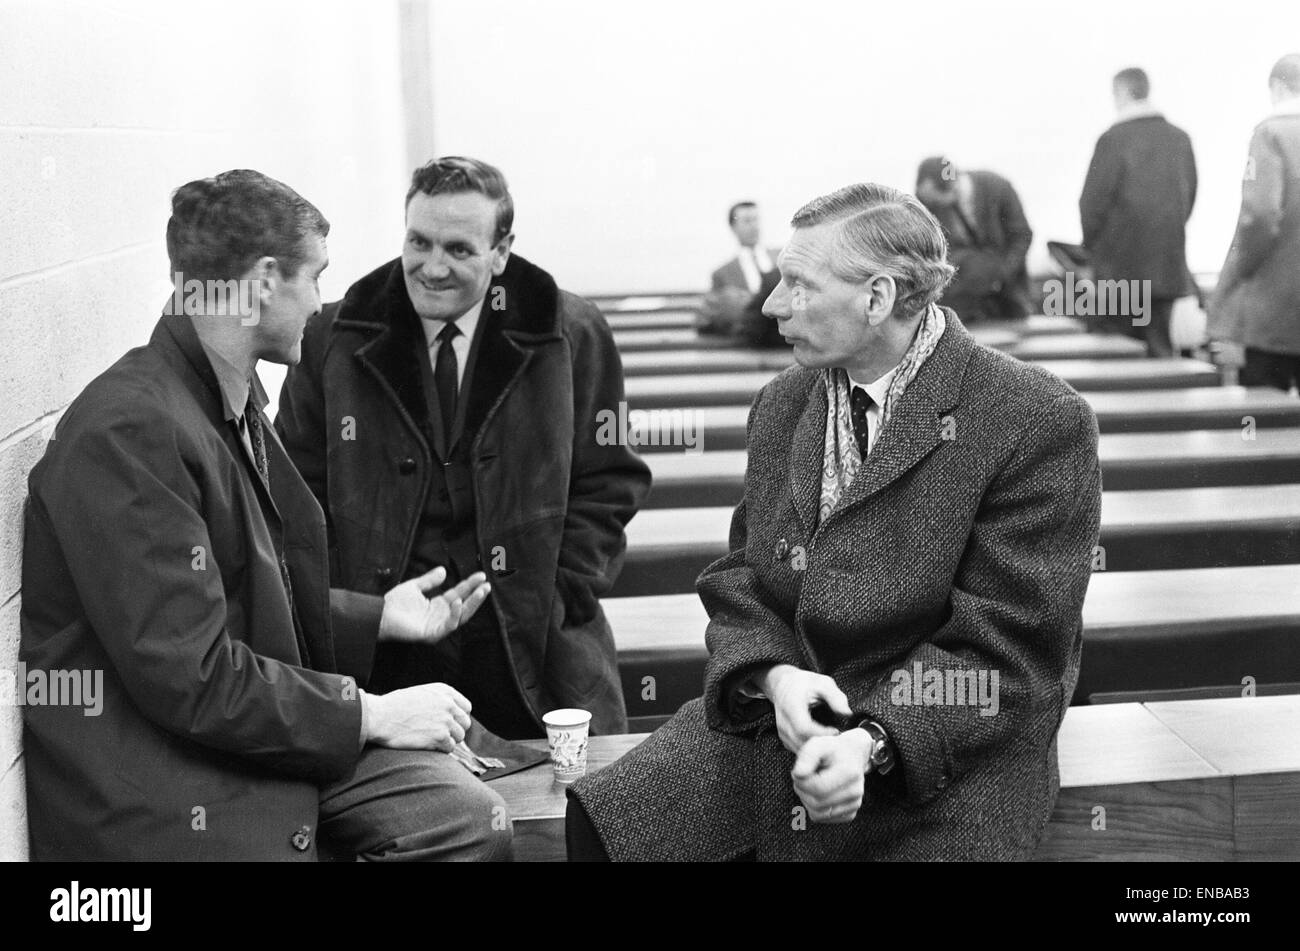 Football Association teach-in at Leeds University. Huddersfield Town manager Ian Greaves, Leeds manager Don Revie and Sid Owen of Leeds having a chat before the class. 12th February 1969. Stock Photo